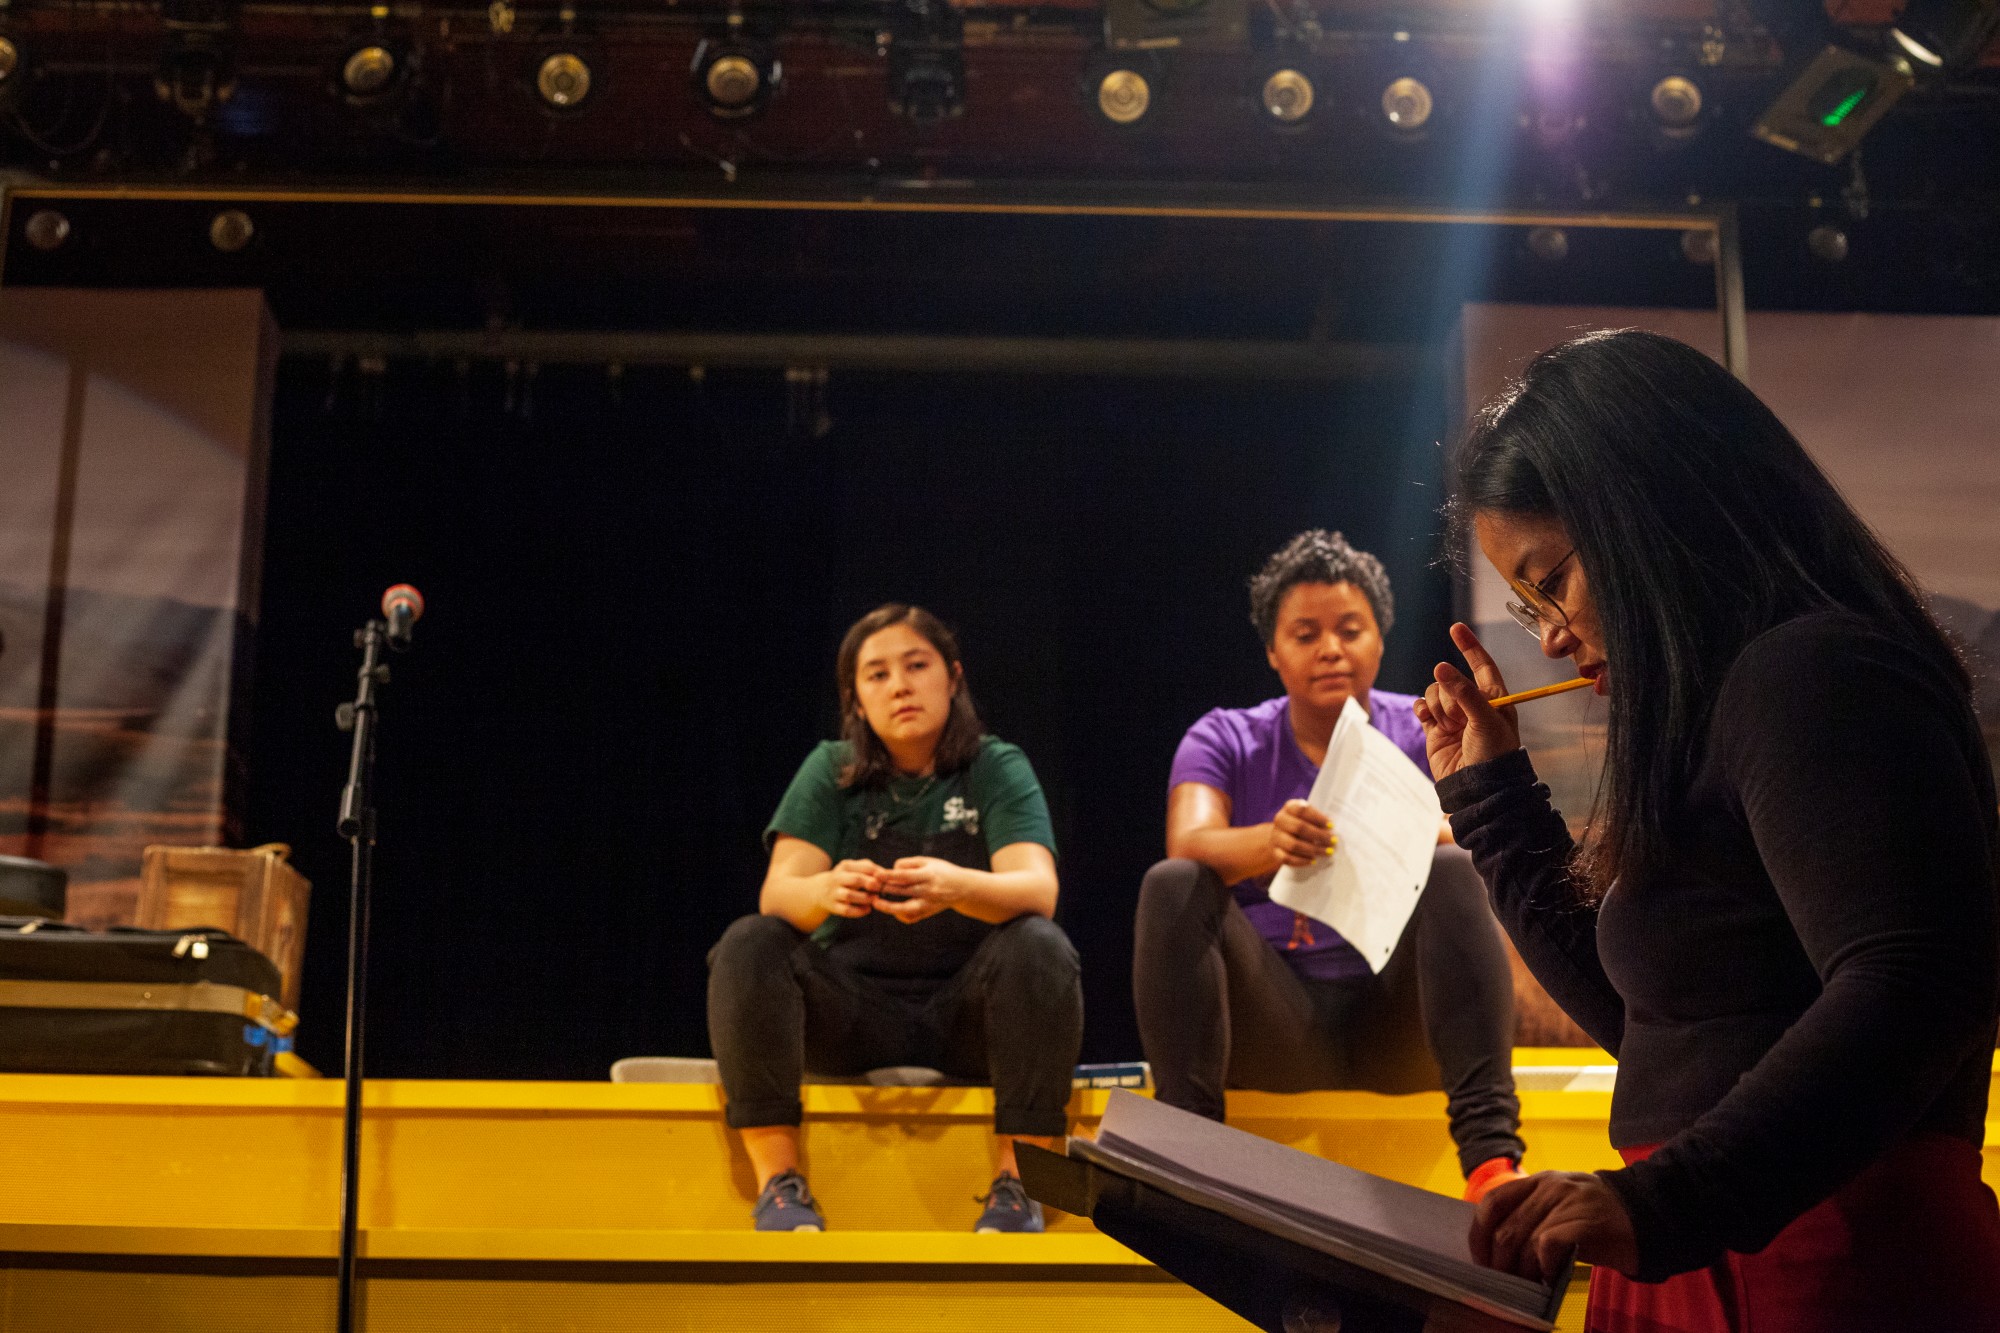 Director Jesca Prudencio directs members of the cast during a rehearsal of Interstate at MixedBlood Theatre on Tuesday, Feb. 18. The production, created by Kit Yan and Melissa Li, follows the experiences of two trans people, navigating a myriad of cultural issues.